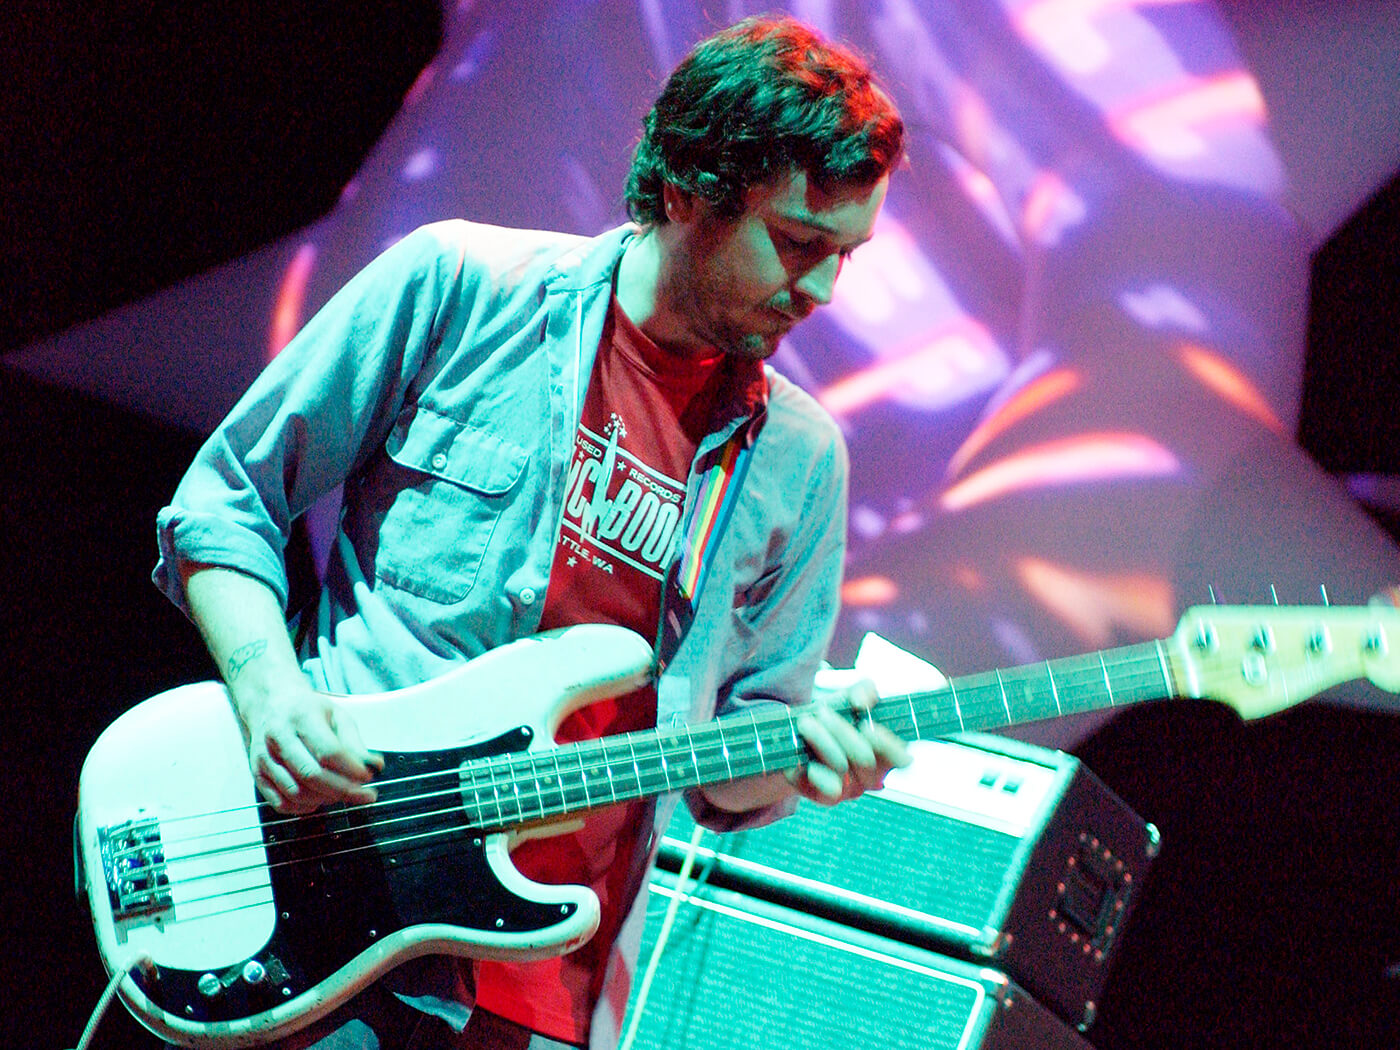 Eric Judy of Modest Mouse